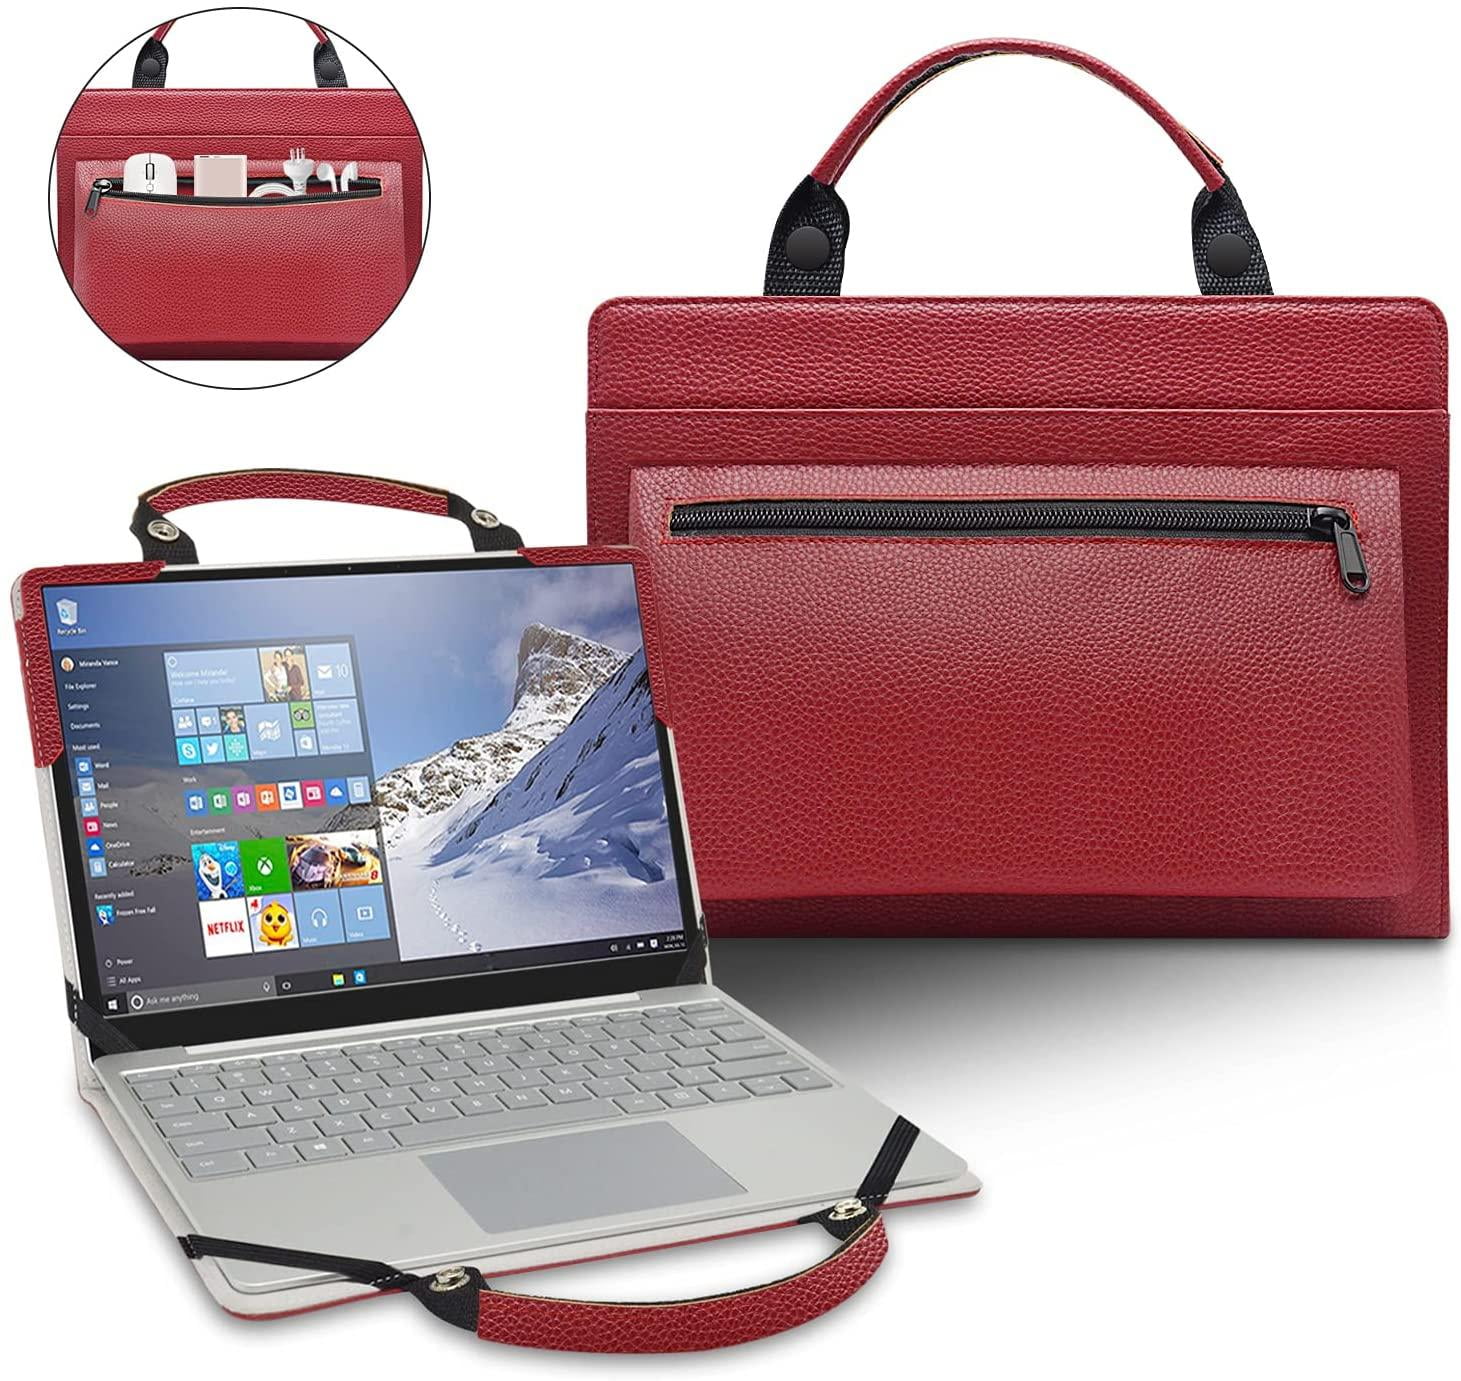 Laptop Sleeve Bag Brautiful Red Fish Cover Computer Liner Package Protective Case Waterproof Computer Portable Bags